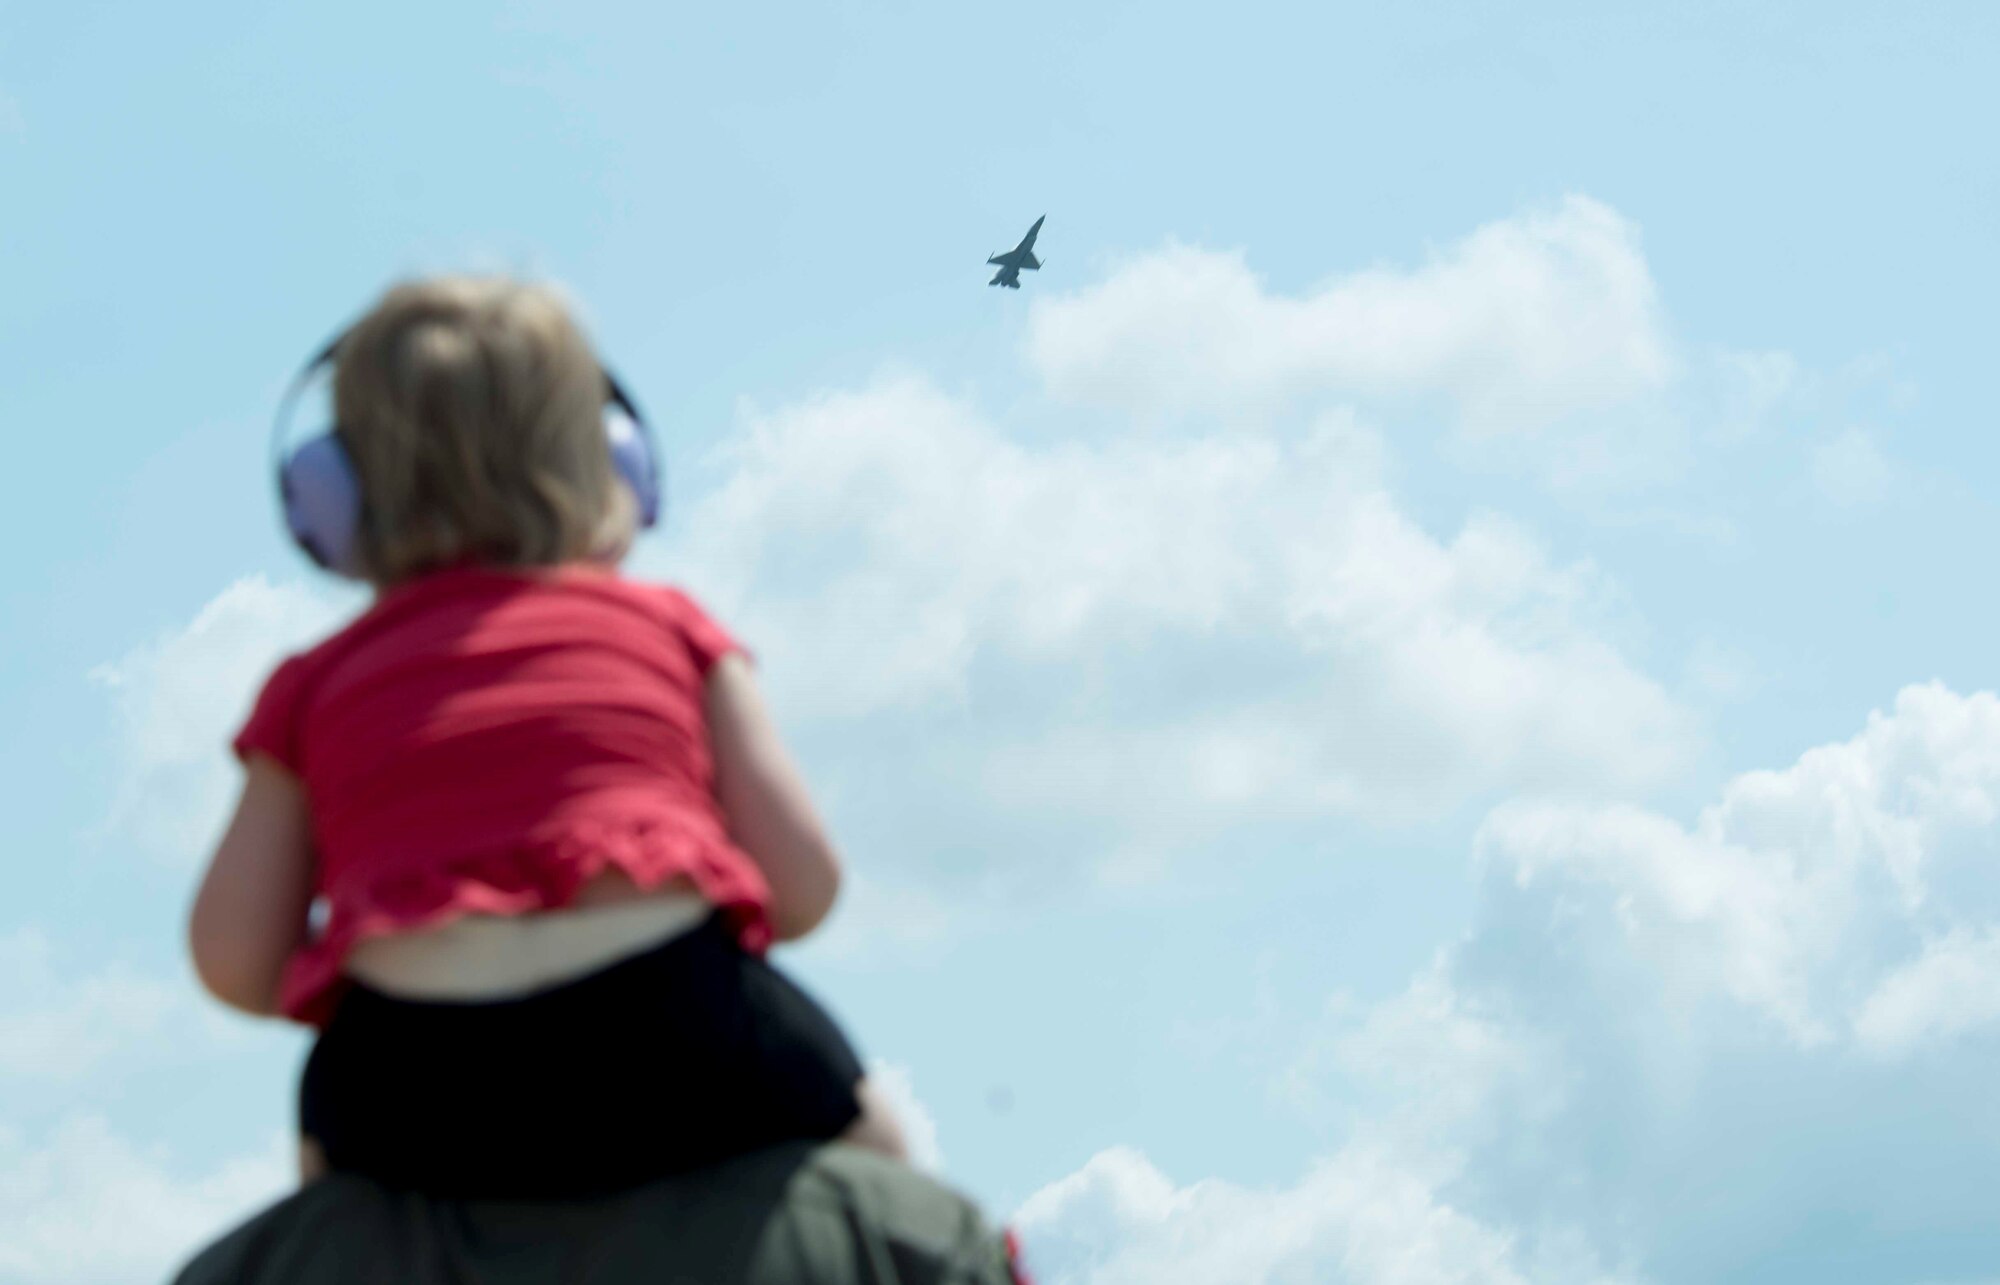 A Team Shaw member watches Maj. John Waters, Air Combat Command Viper Demonstration Team commander and pilot, fly an F-16CM Fighting Falcon at Shaw Air Force Base (AFB), S.C., June 9, 2018.